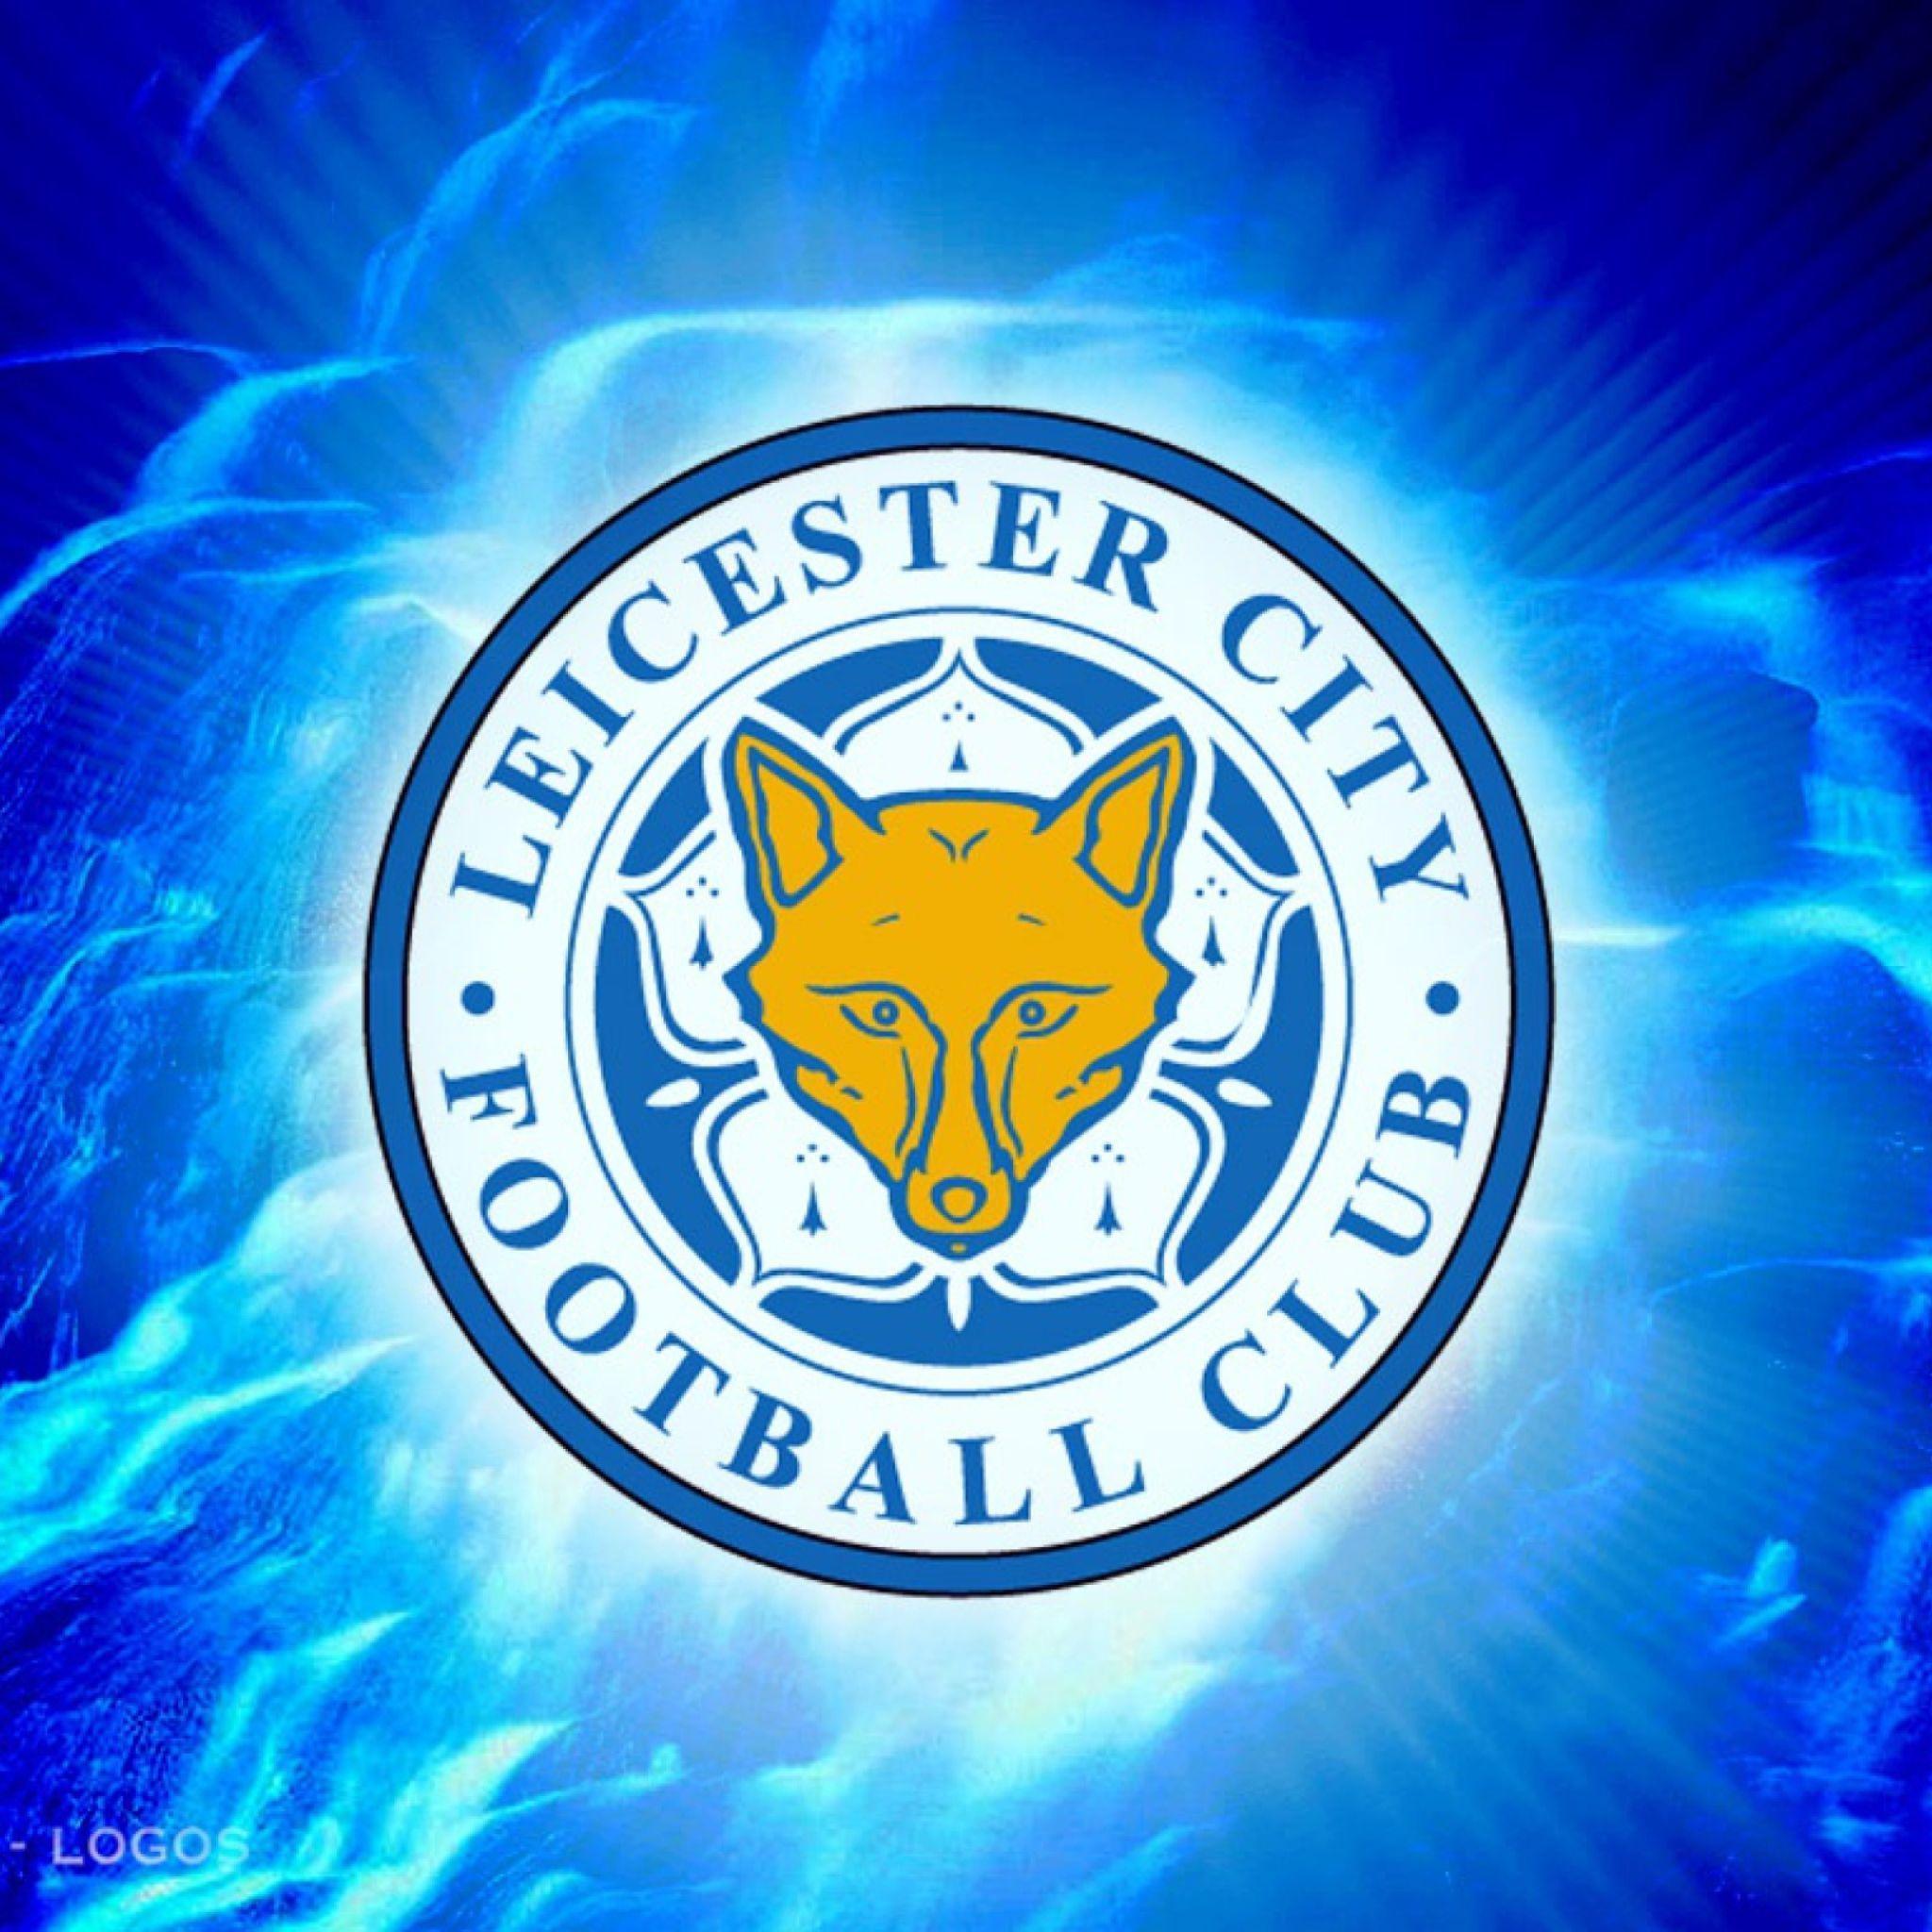 Leicester City F.c. Wallpapers - Wallpaper Cave